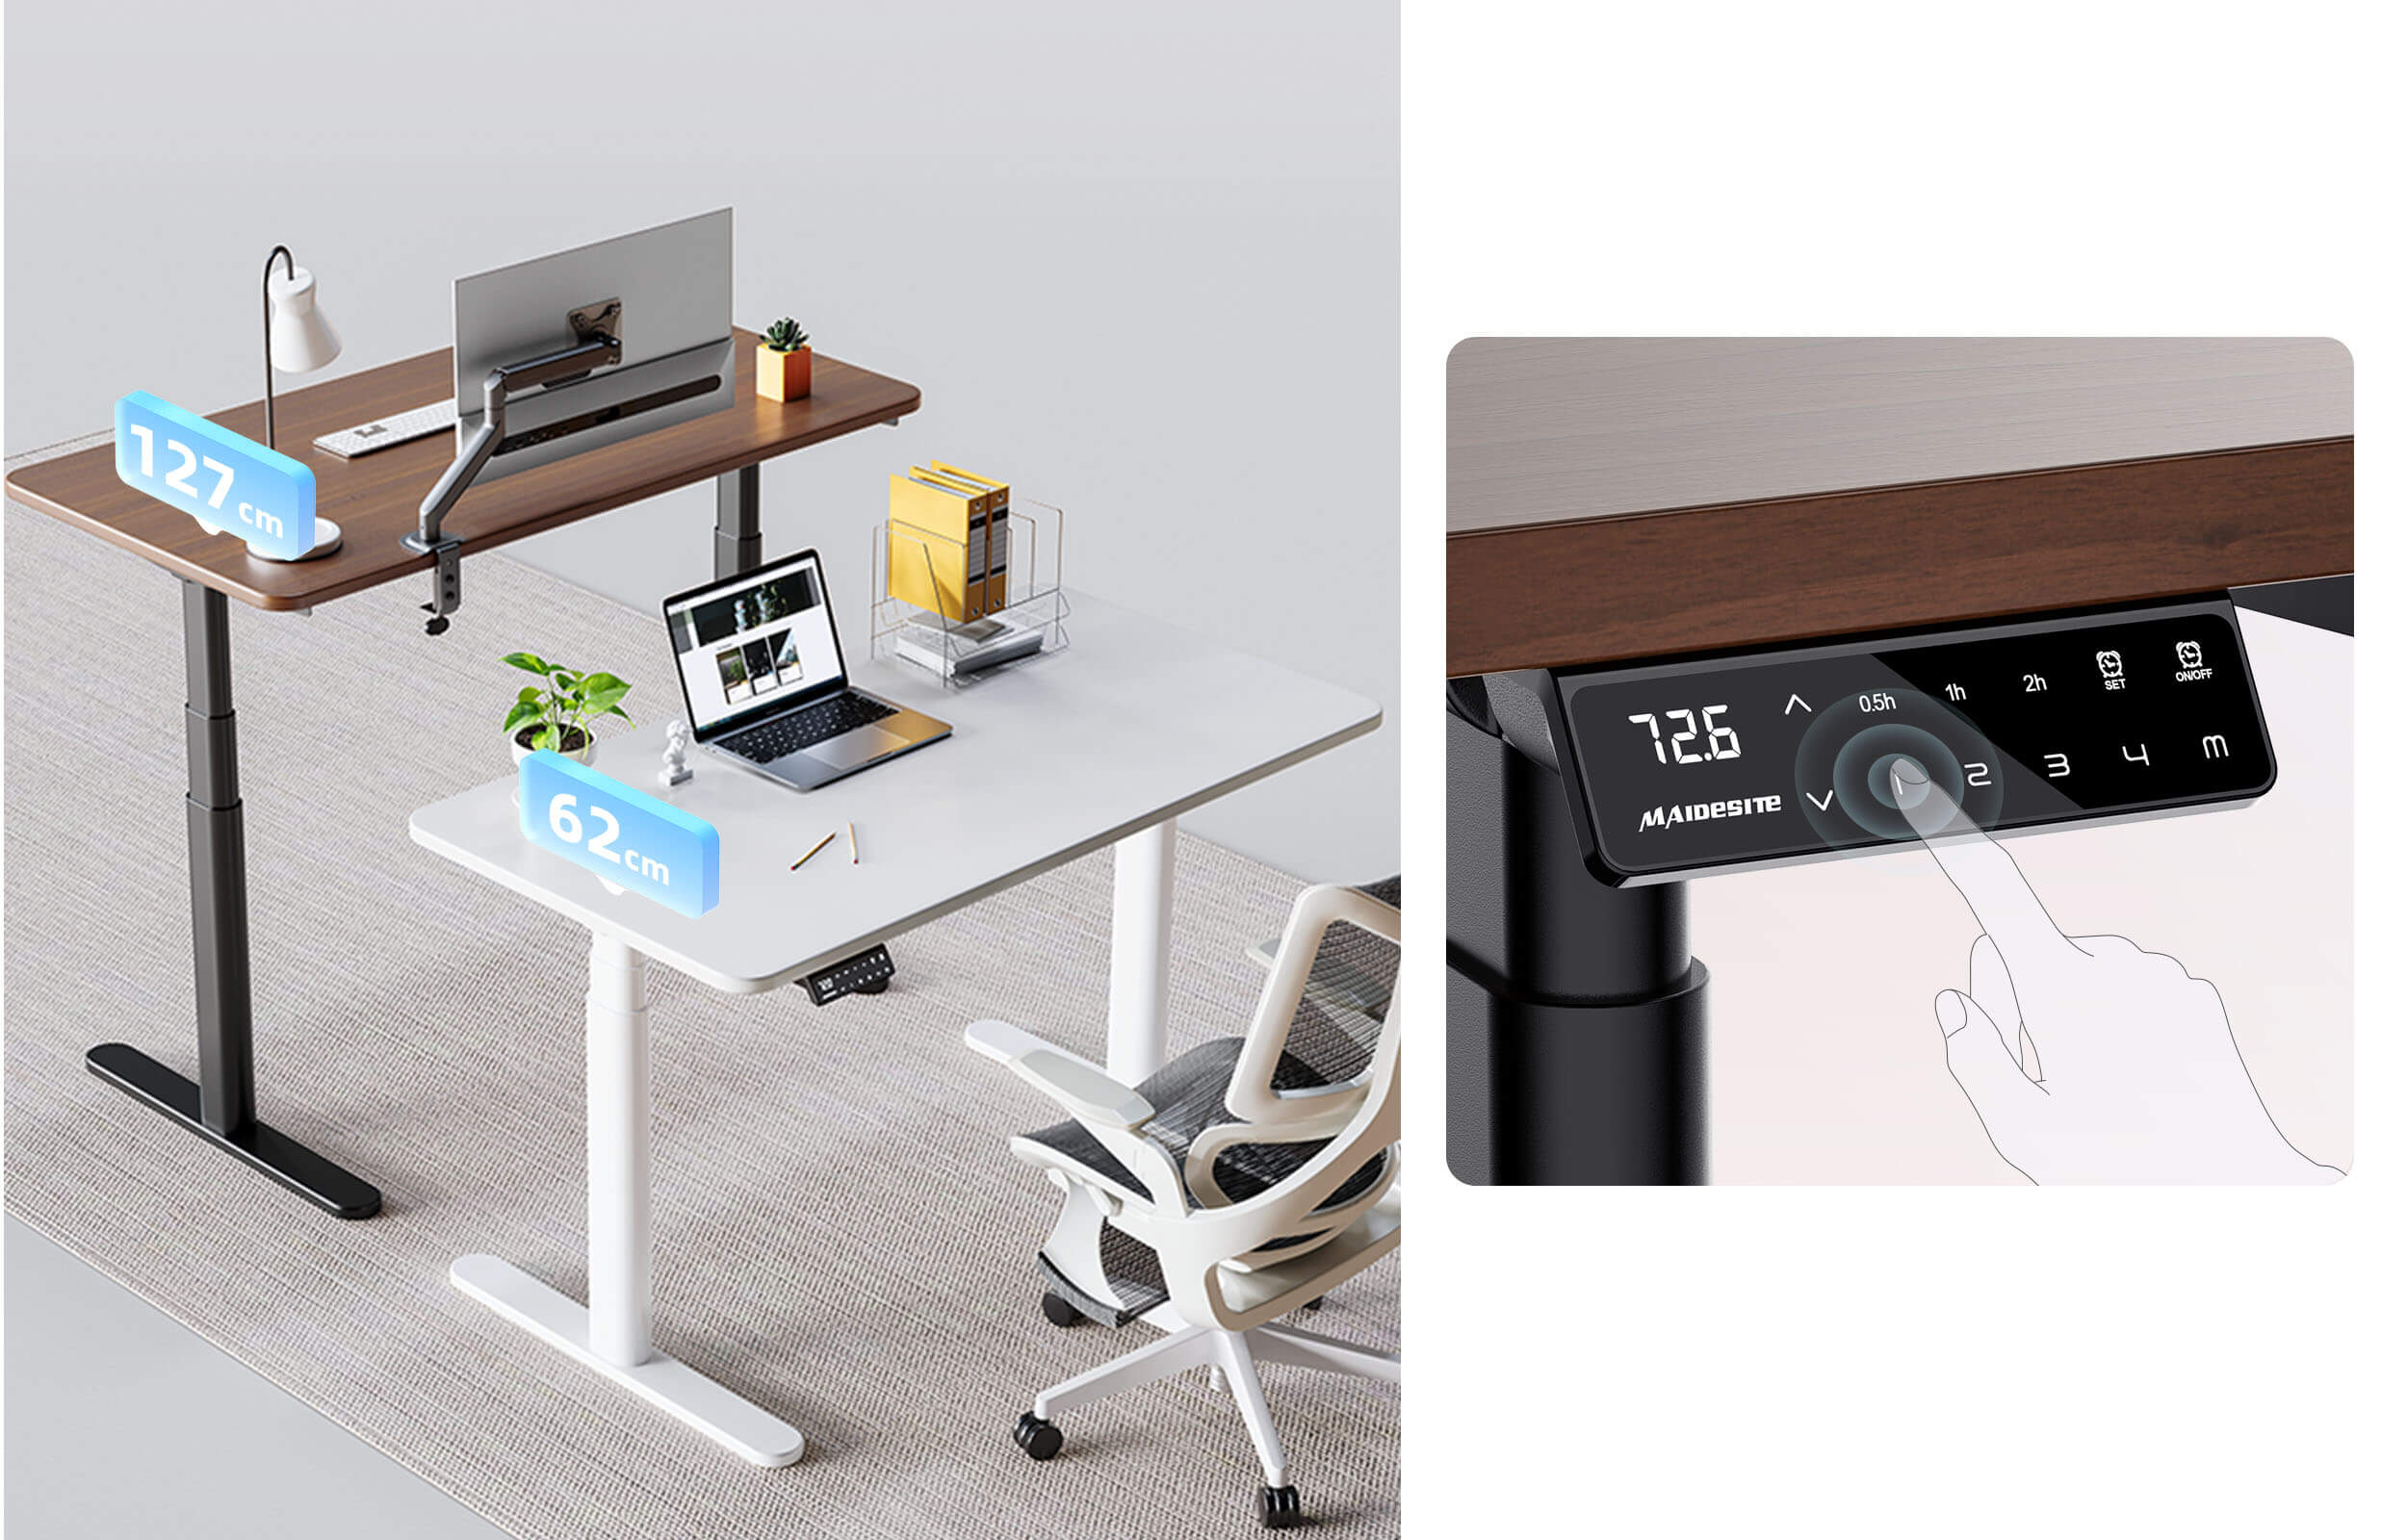 TH2 Pro Plus electric standing desk with touch screen panel for home office